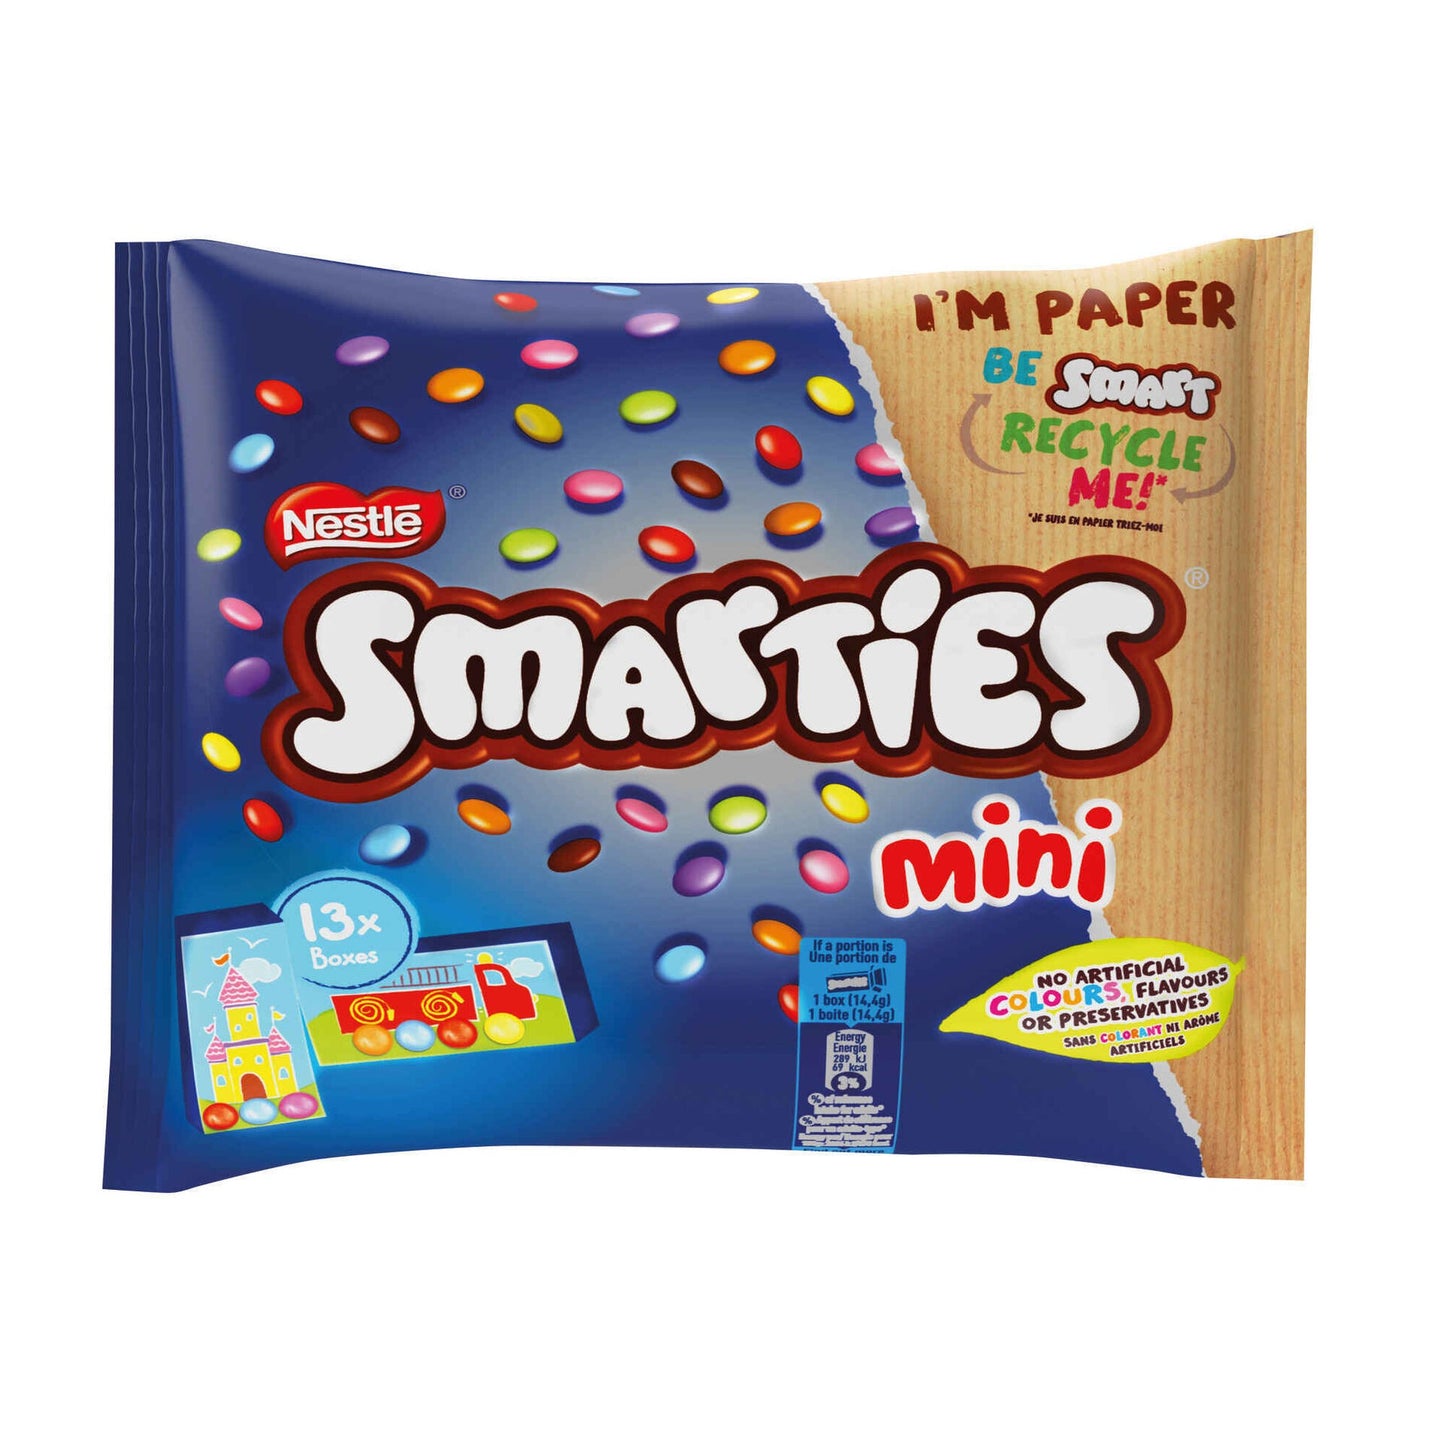 Pack Smarties Mini 13 Unidades